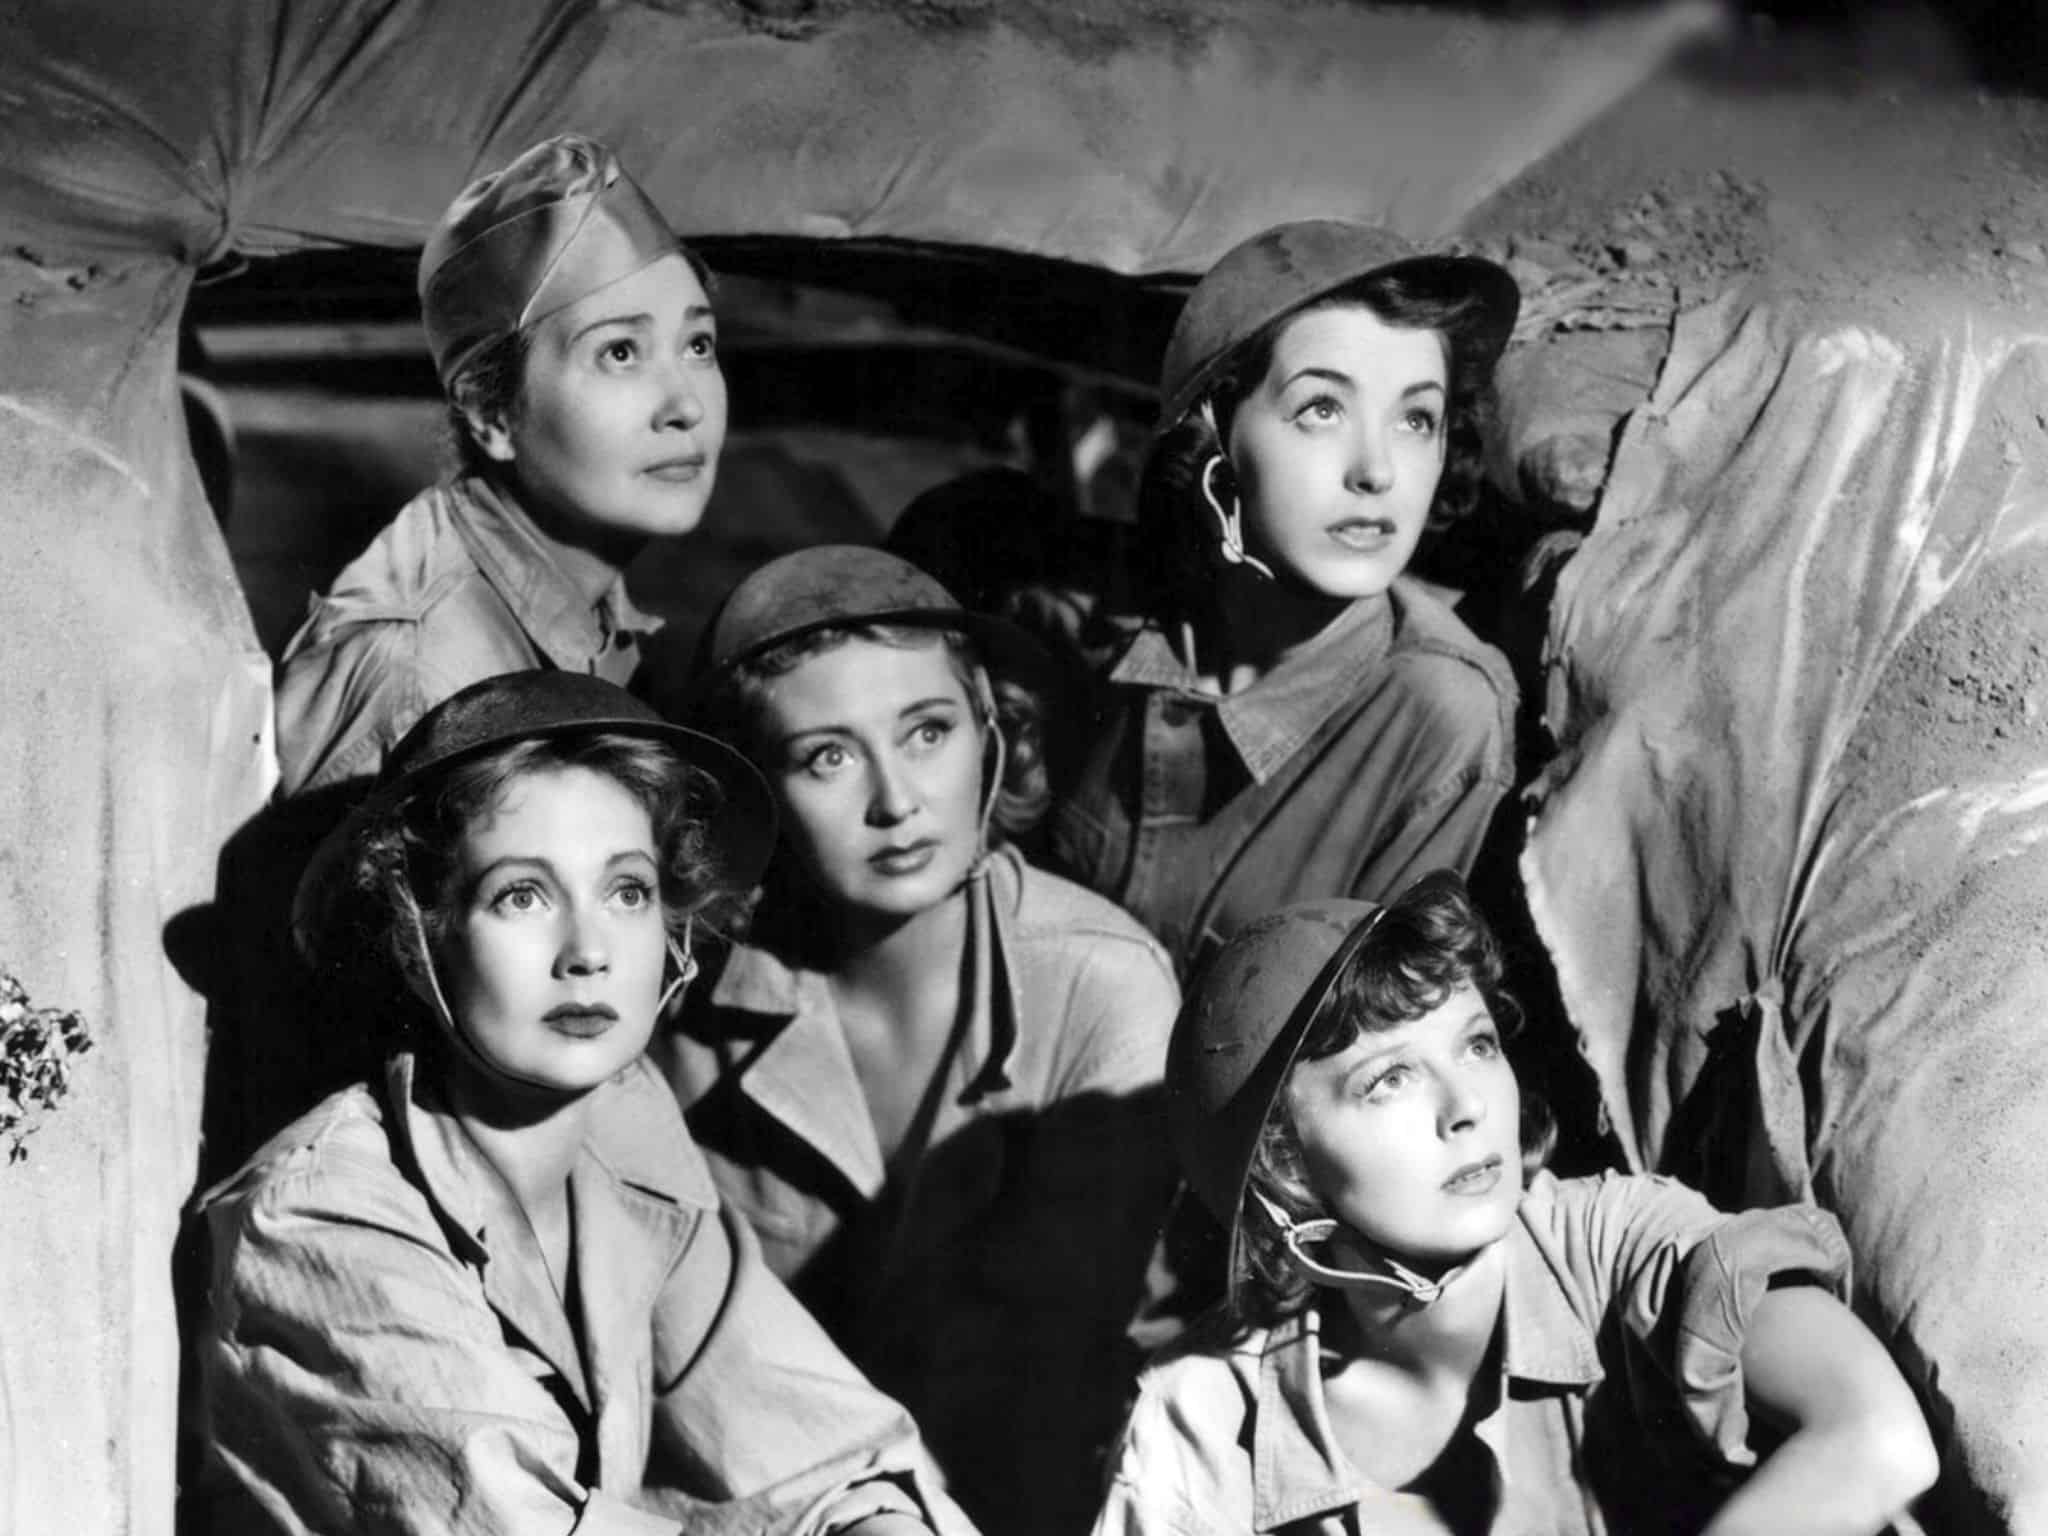 Ann Sothern, Fay Bainter, Joan Blondell, Marsha Hunt (top right), and Margaret Sullavan in Cry Havoc. Hunt appeared in some 70 films during her career - MGM publicity photo